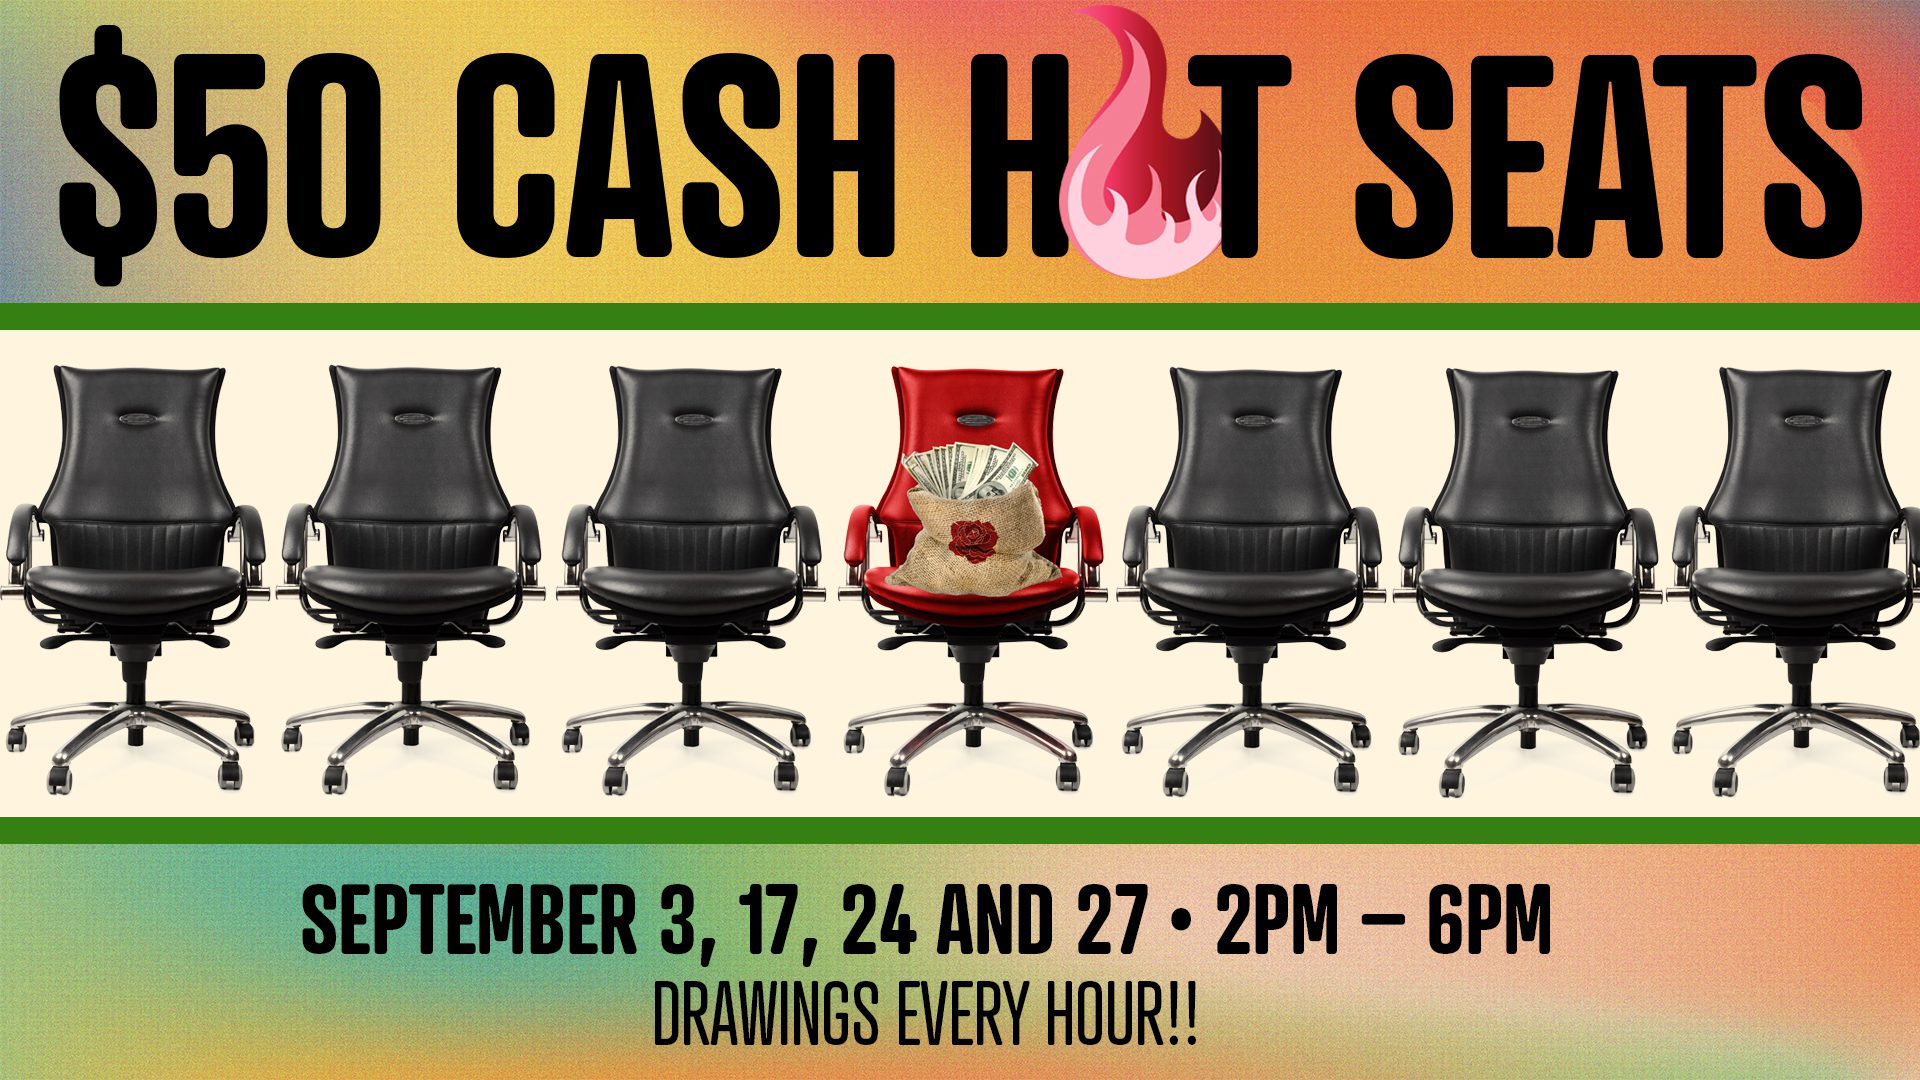 A poster with chairs and an advertisement for the cash hot seat.